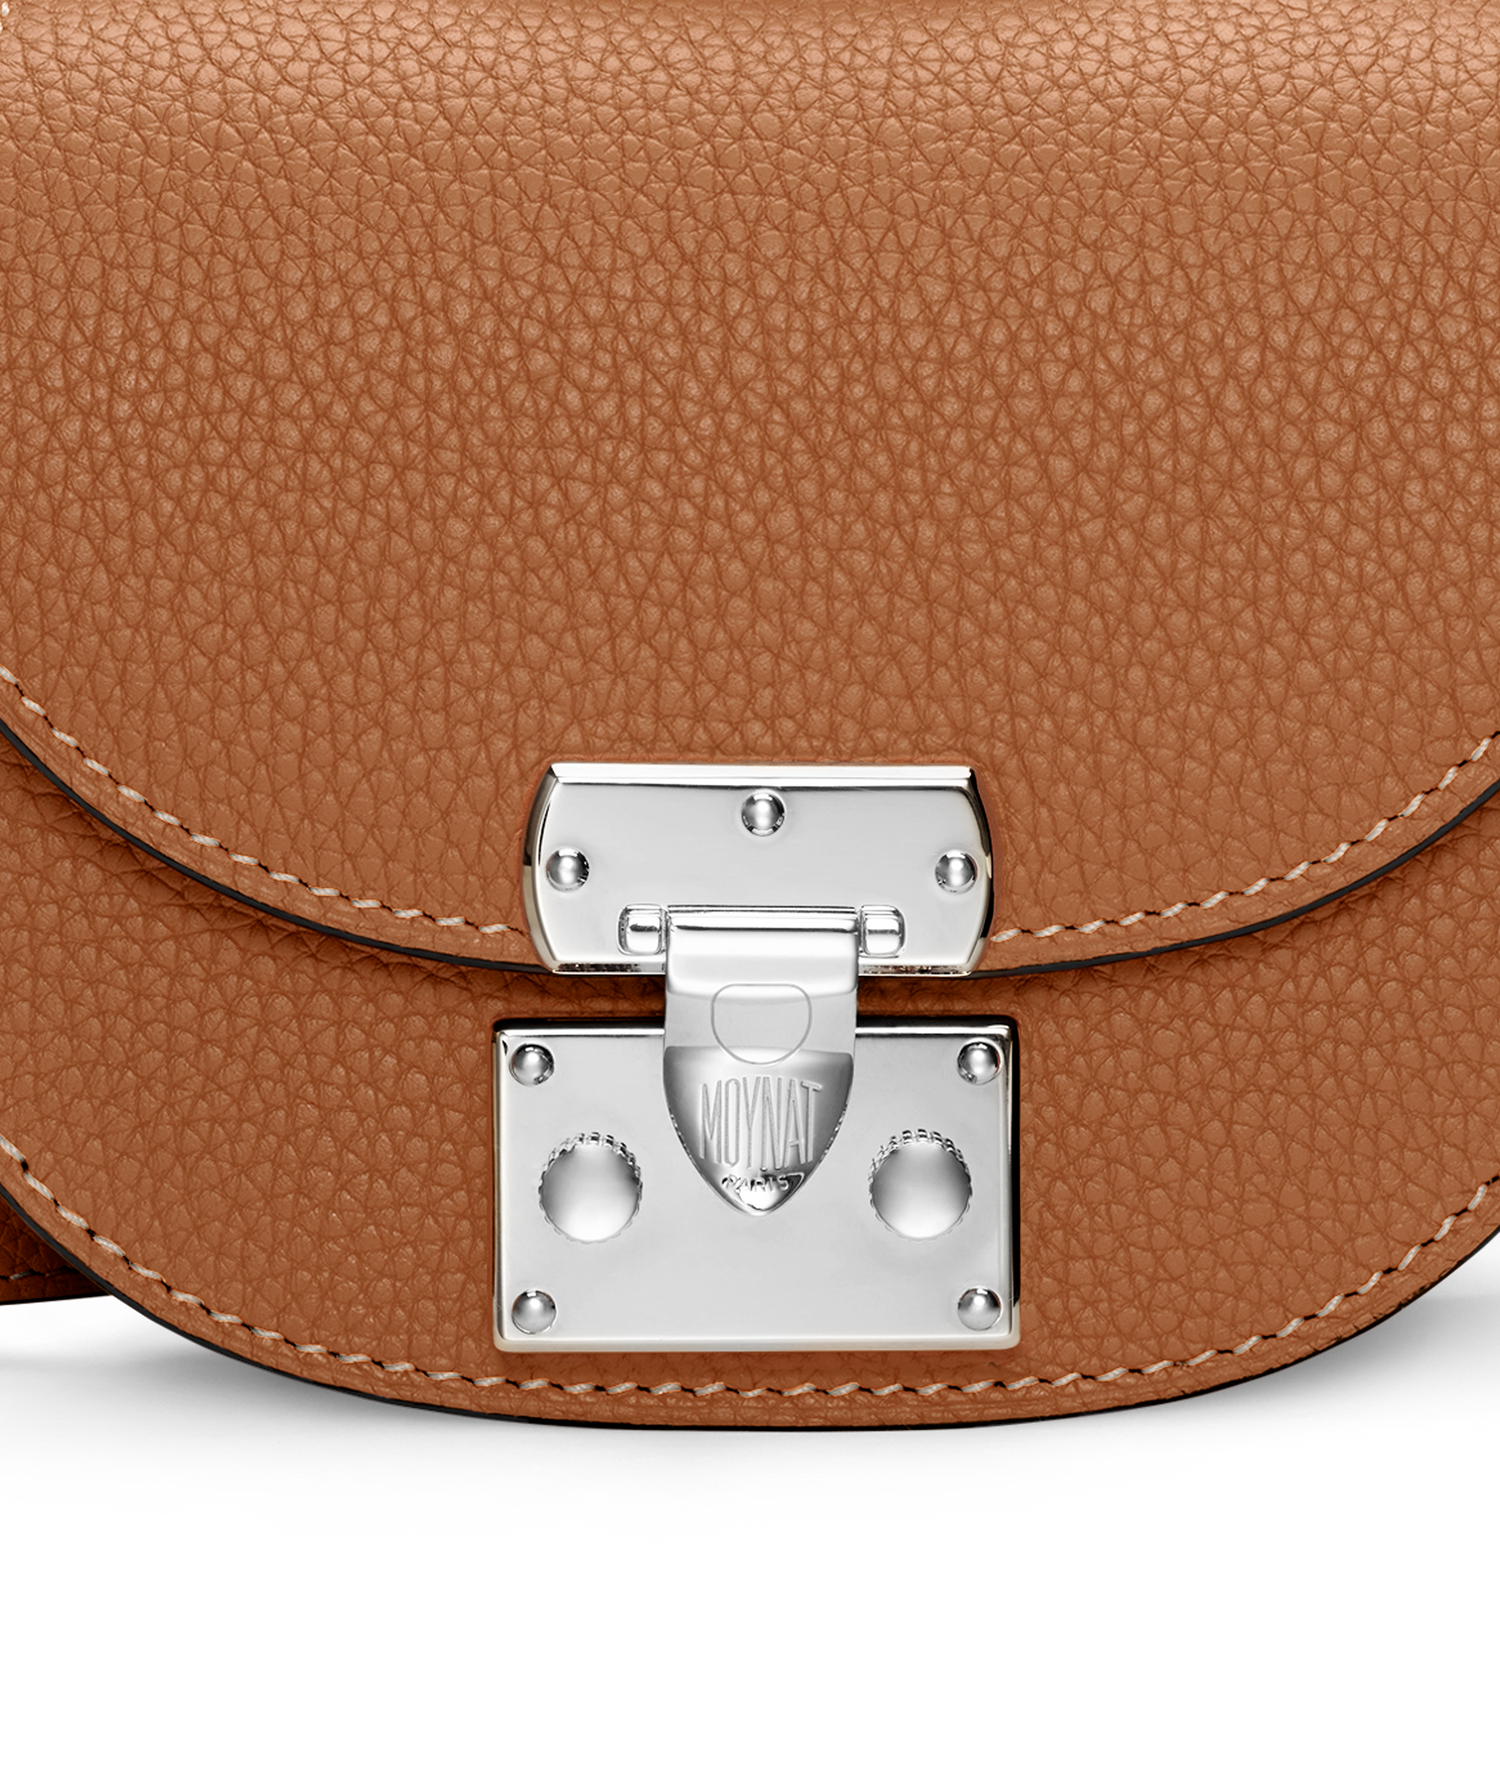 Moynat signature styles - Flori, Wheel and Voyage bags